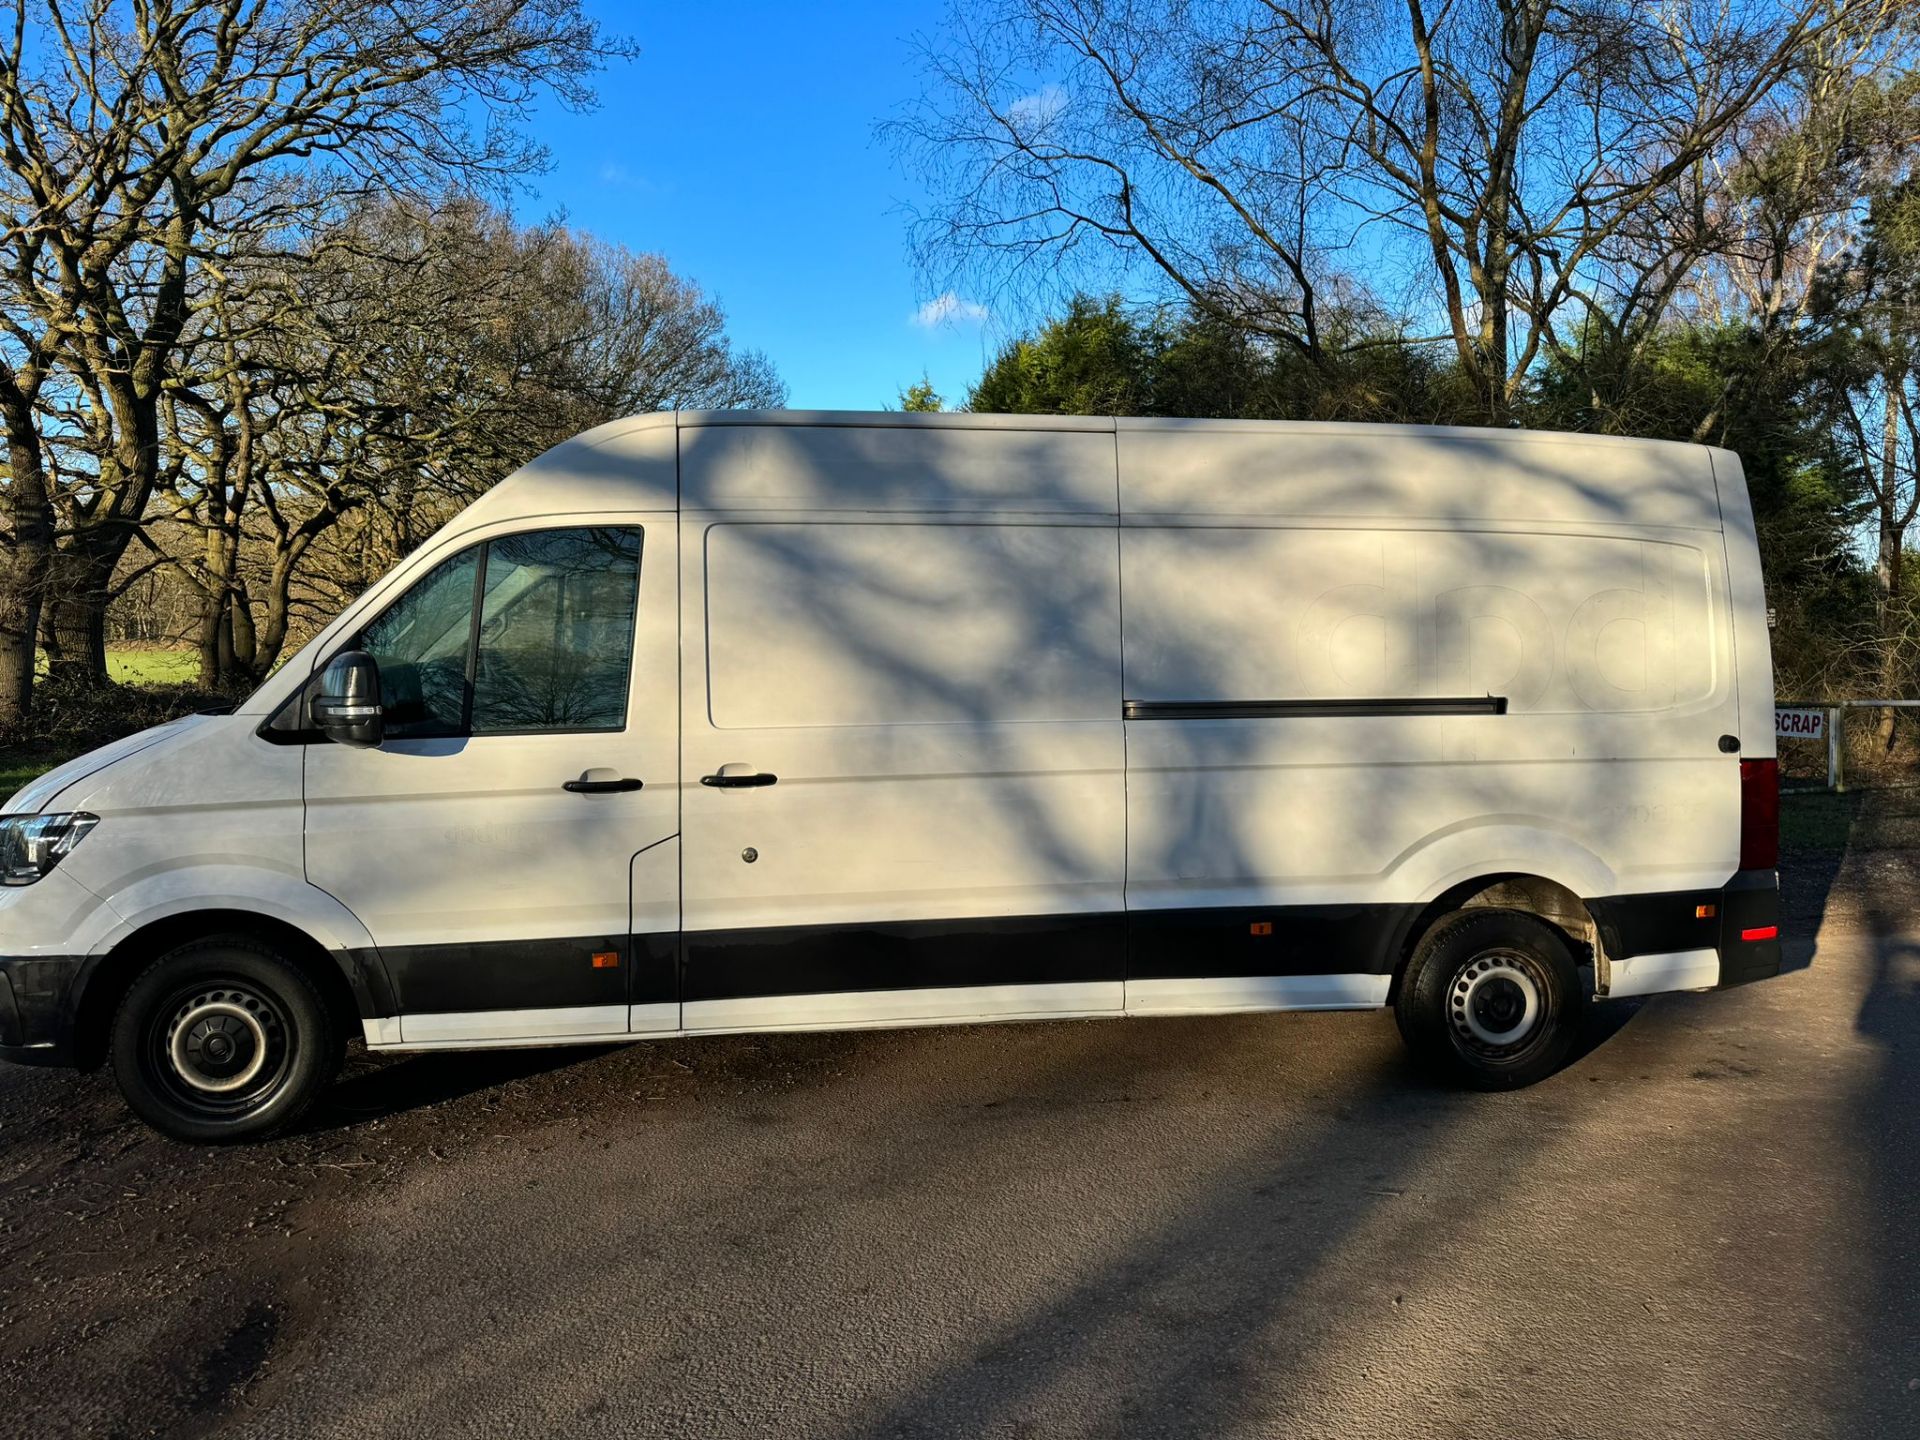 2019 69 VOLKSWAGEN CRAFTER LWB HIGH ROOF PANEL VAN - 87K MILES - PLY LINED. - Image 4 of 11